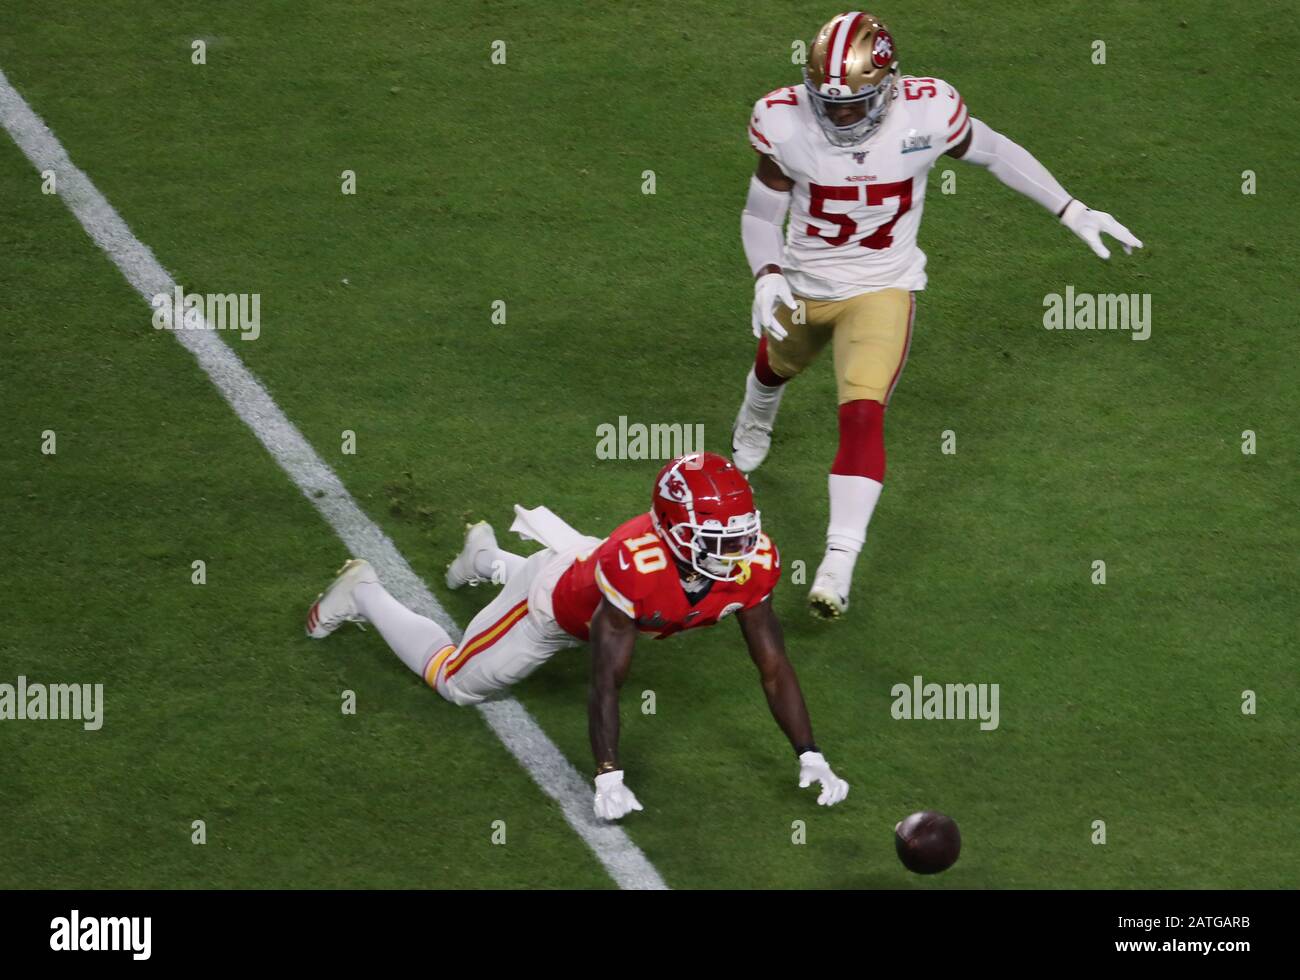 Miami Gardens, USA. 02nd Feb, 2020. San Francisco 49ers linebacker Dre  Greenlaw (57) pressures Kansas City Chiefs wide receiver Tyreek Hill (10)  in the first quarter of Super Bowl LIV at the